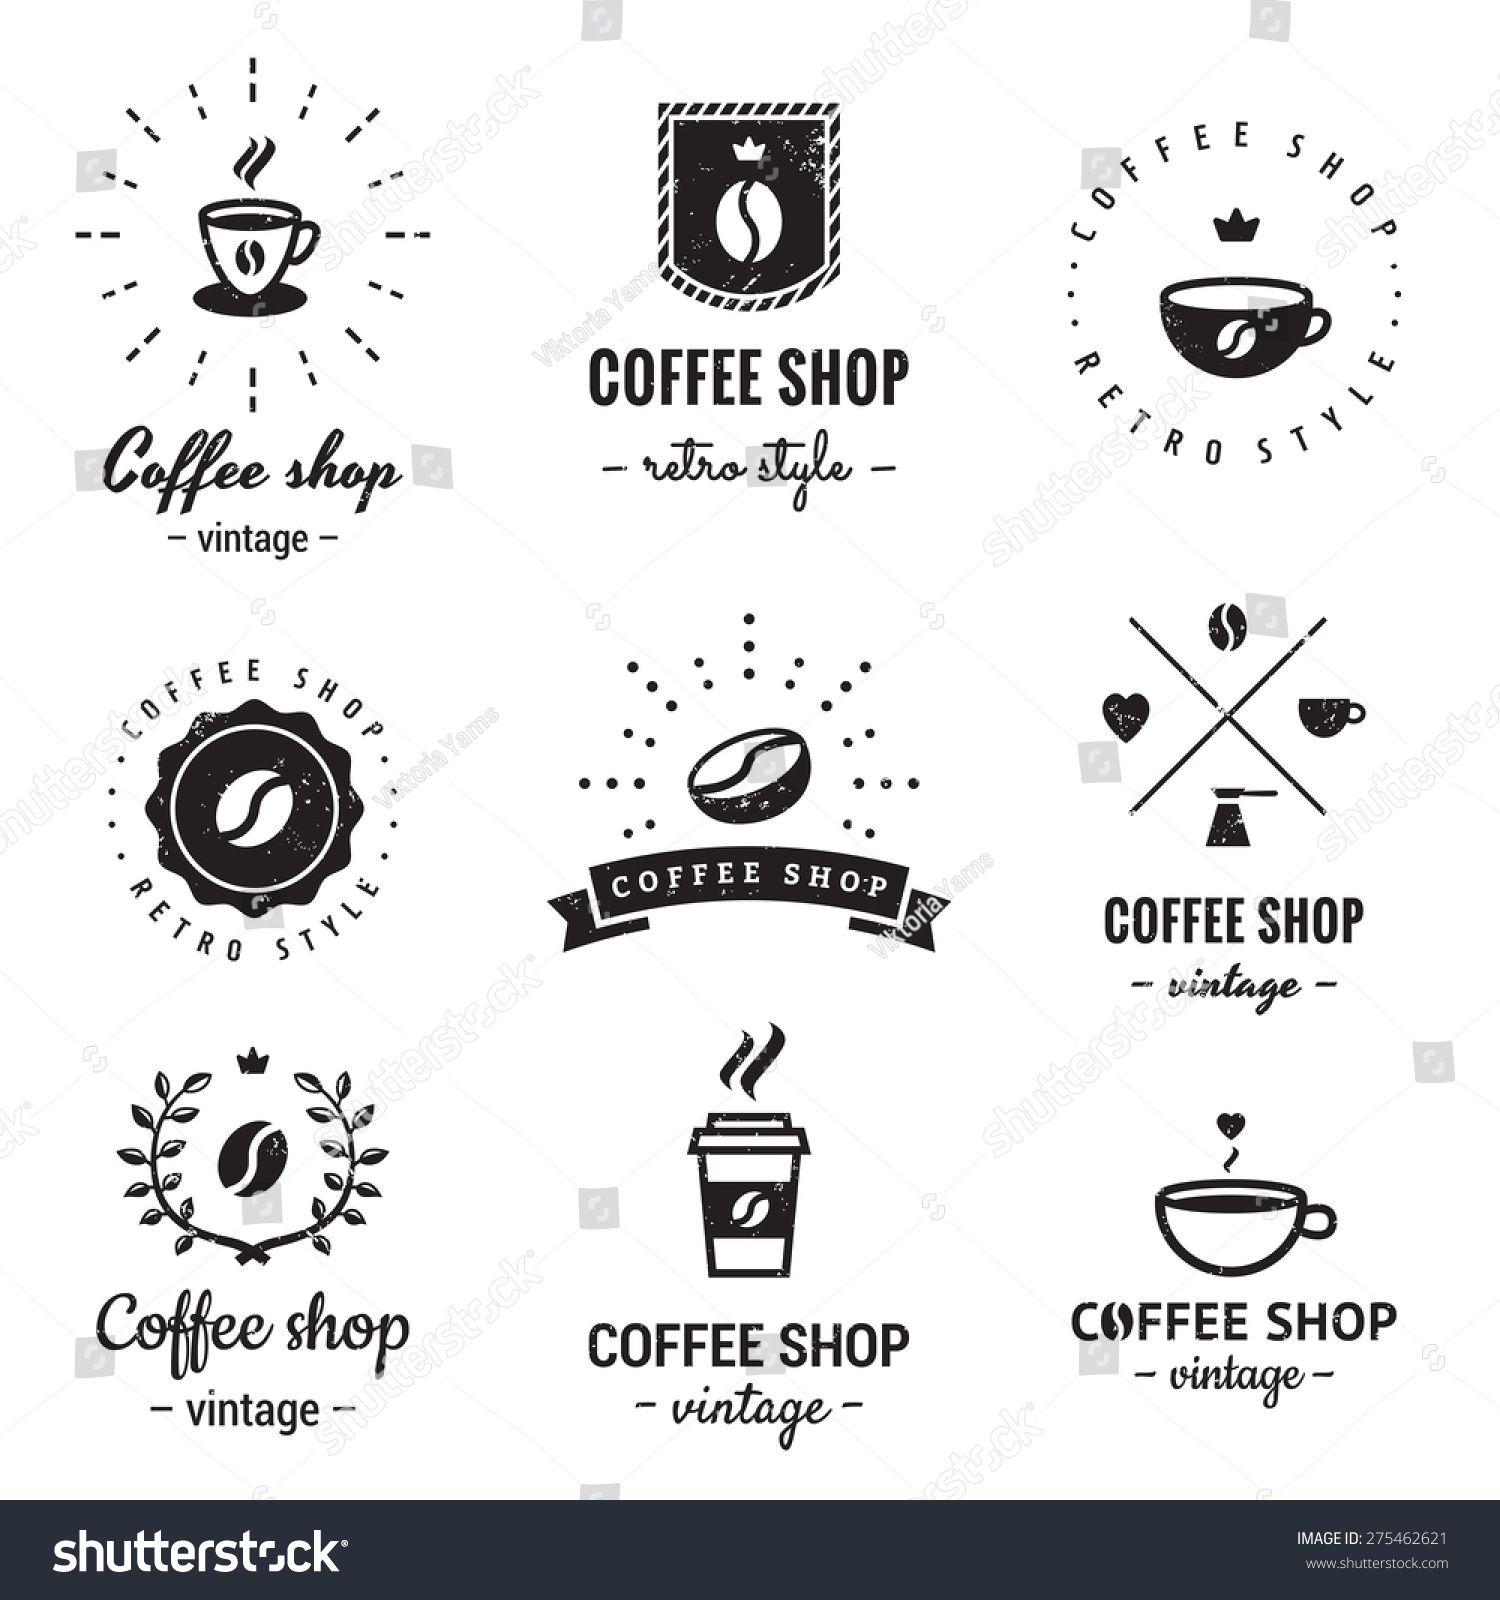 Vintage Coffee Logo - Coffee shop logo vintage vector set. Hipster and retro style ...